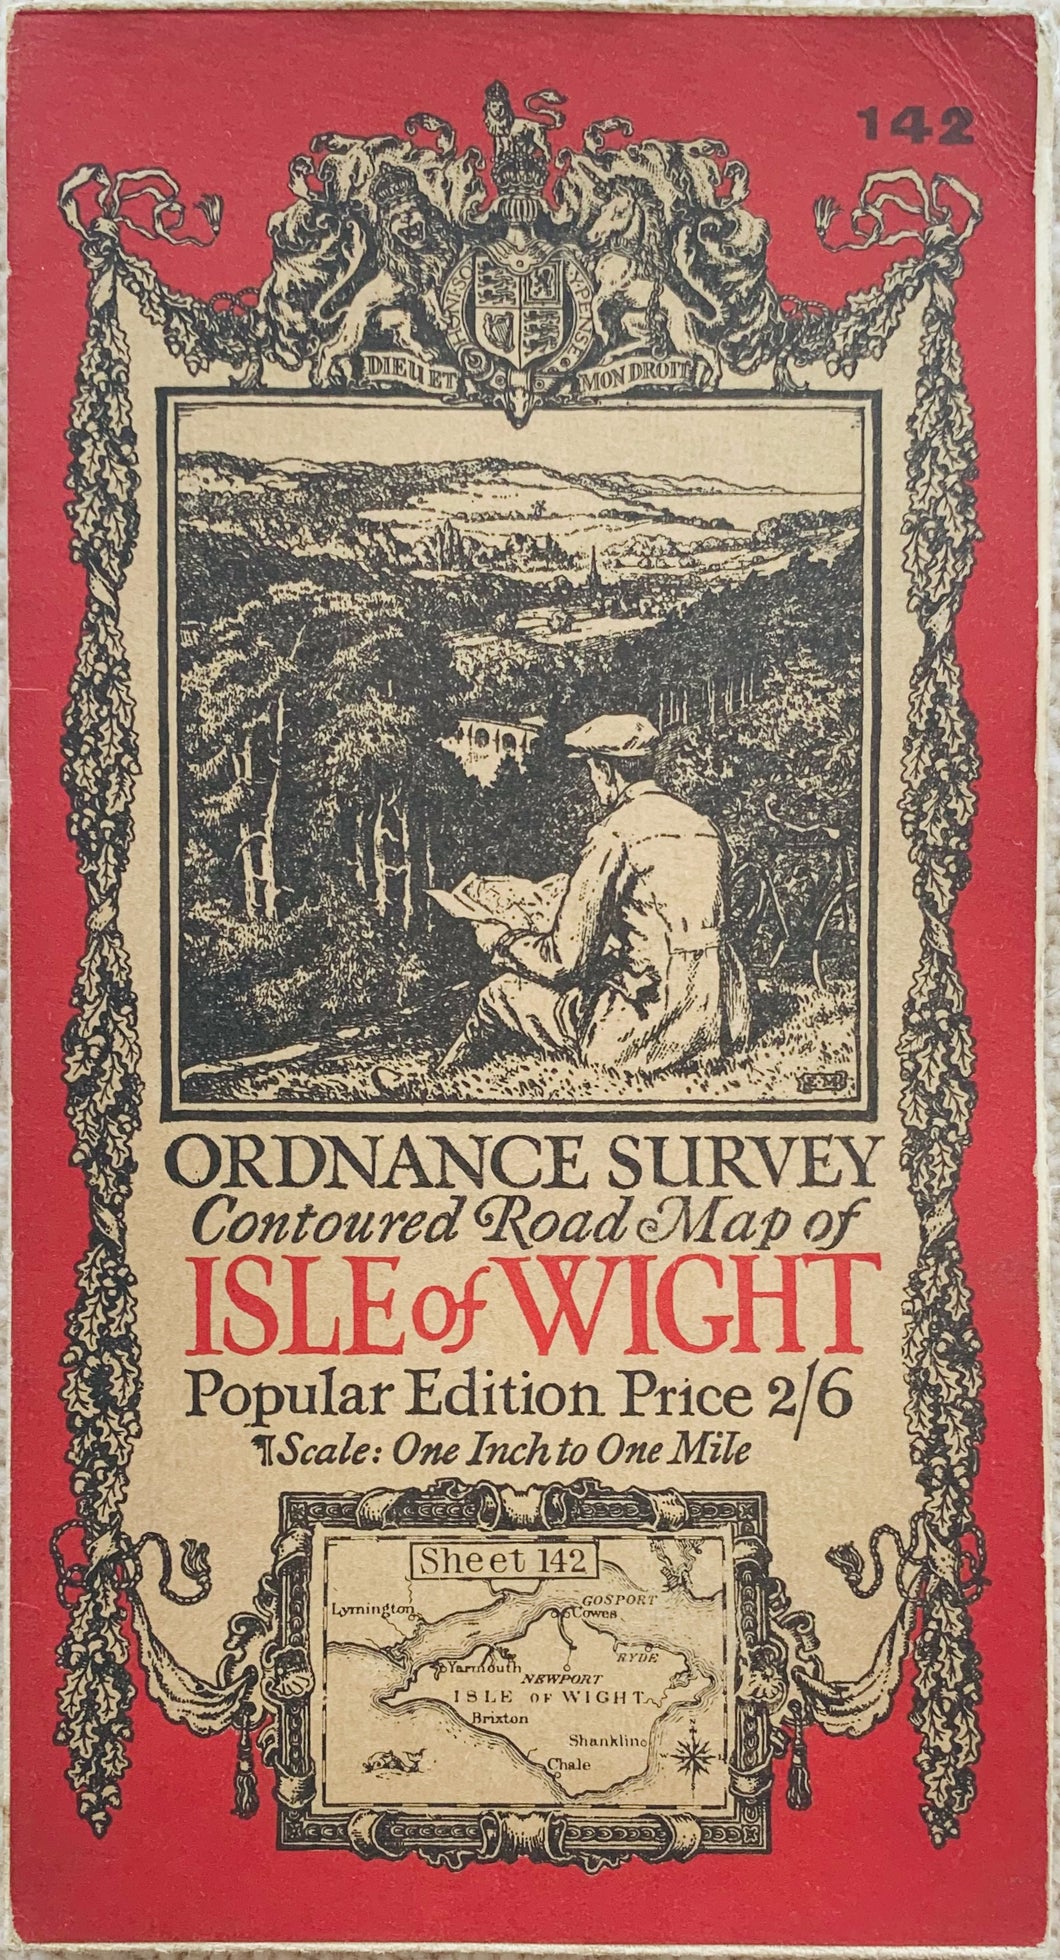 Ordnance Survey Map of the Isle of Wight, published and printed c.1928